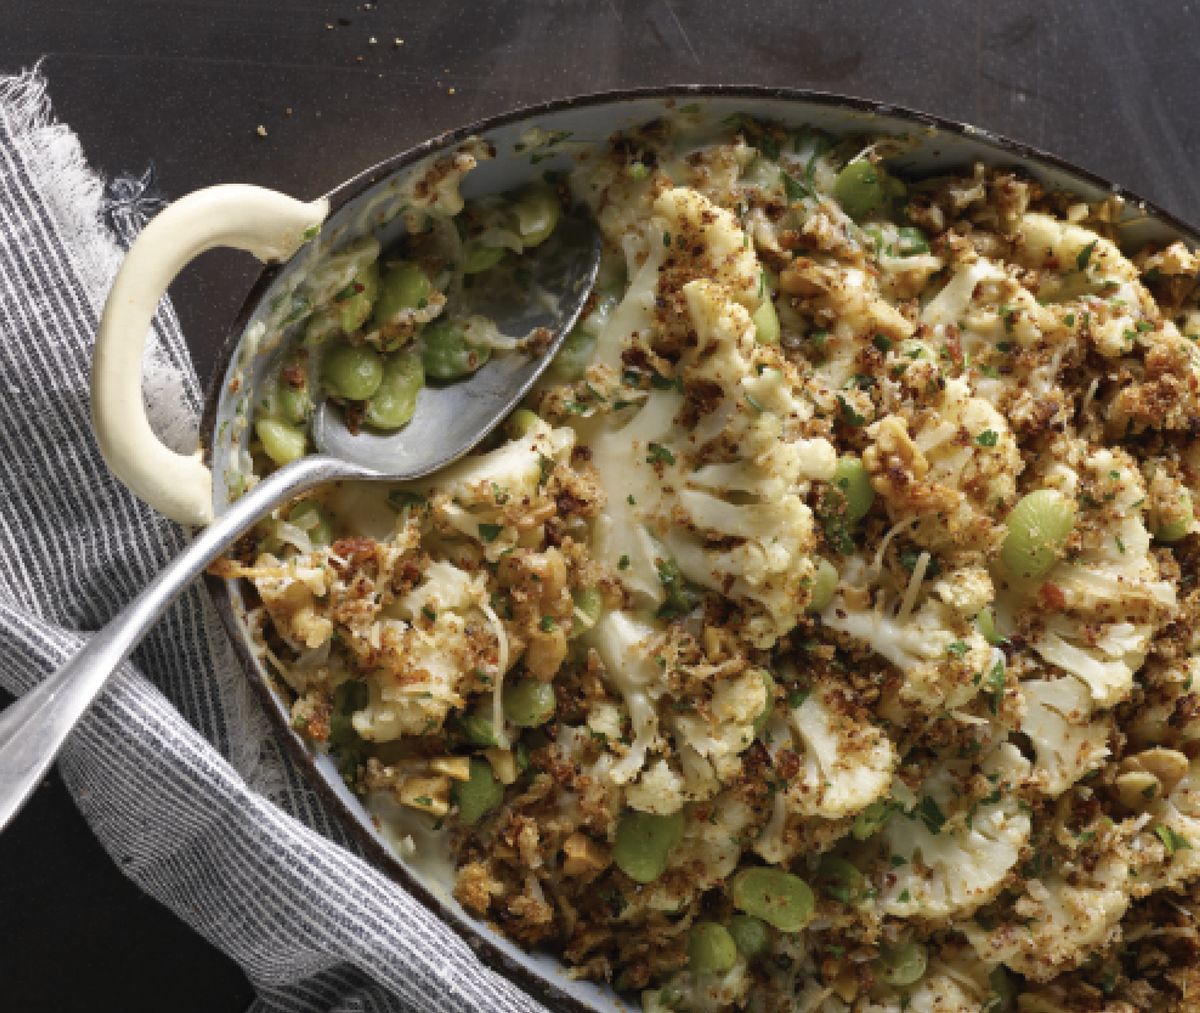 Cauliflower and Lima Bean Gratin (From "Easy Beans" by Jackie Freeman)